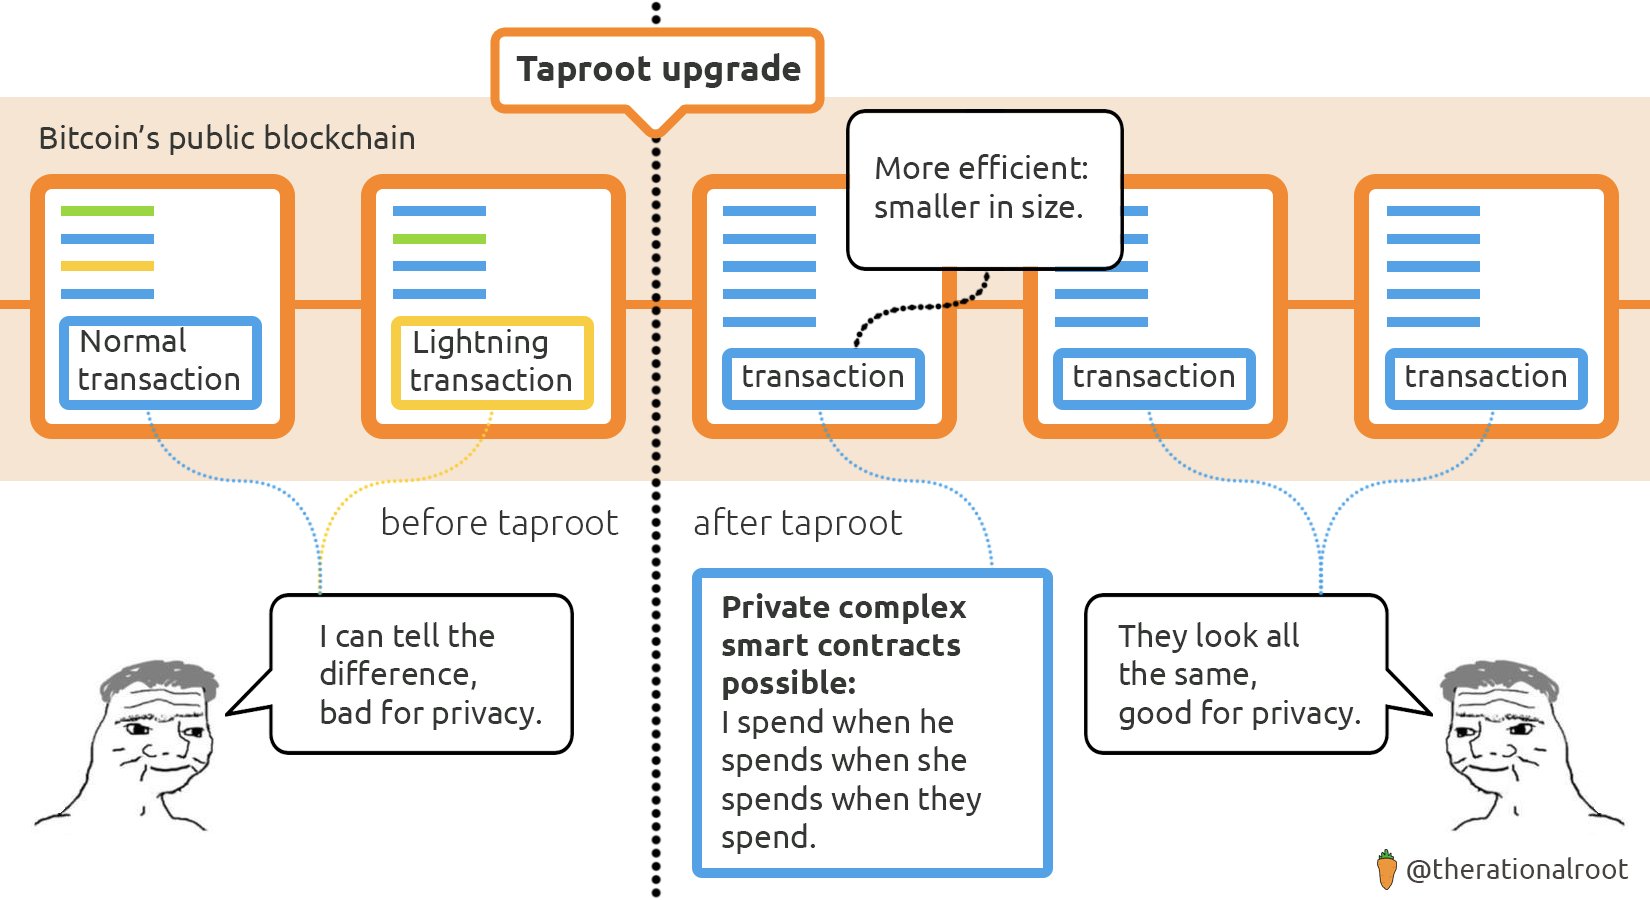 Taproot upgrade